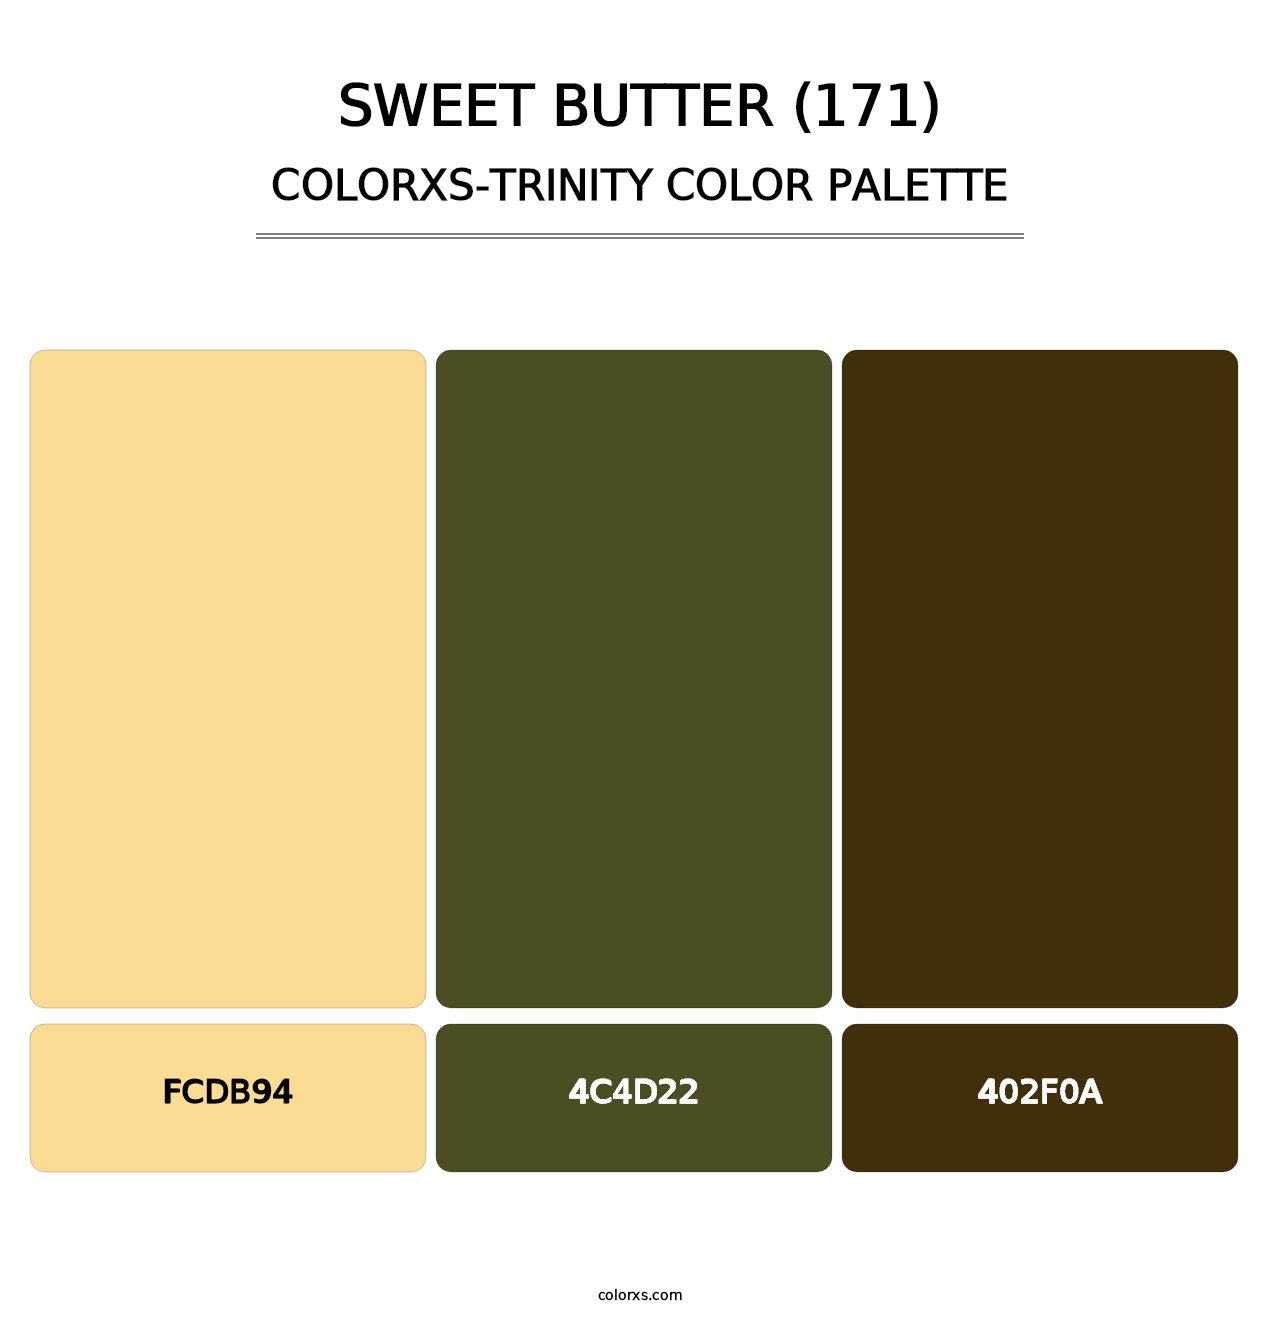 Sweet Butter (171) - Colorxs Trinity Palette